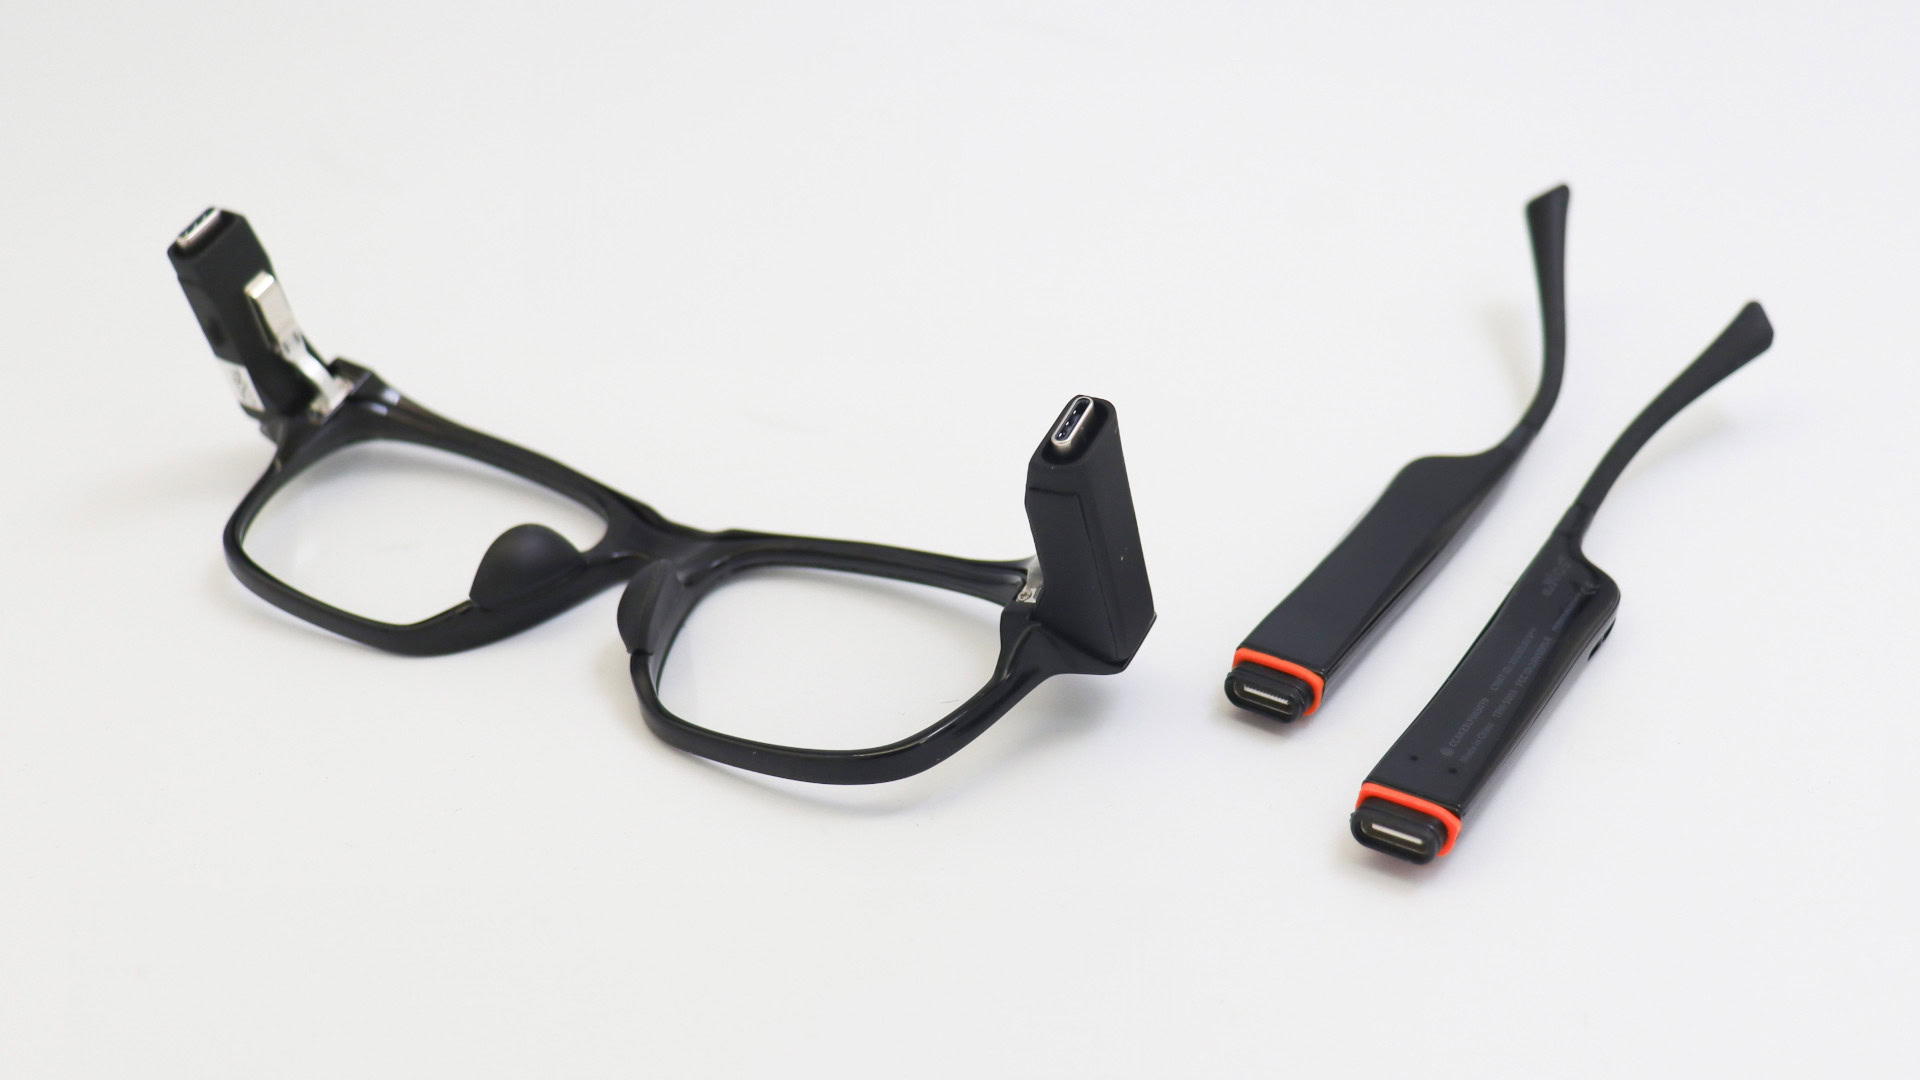 Solos AirGo Vision smart glasses placed on white table with stems detached.